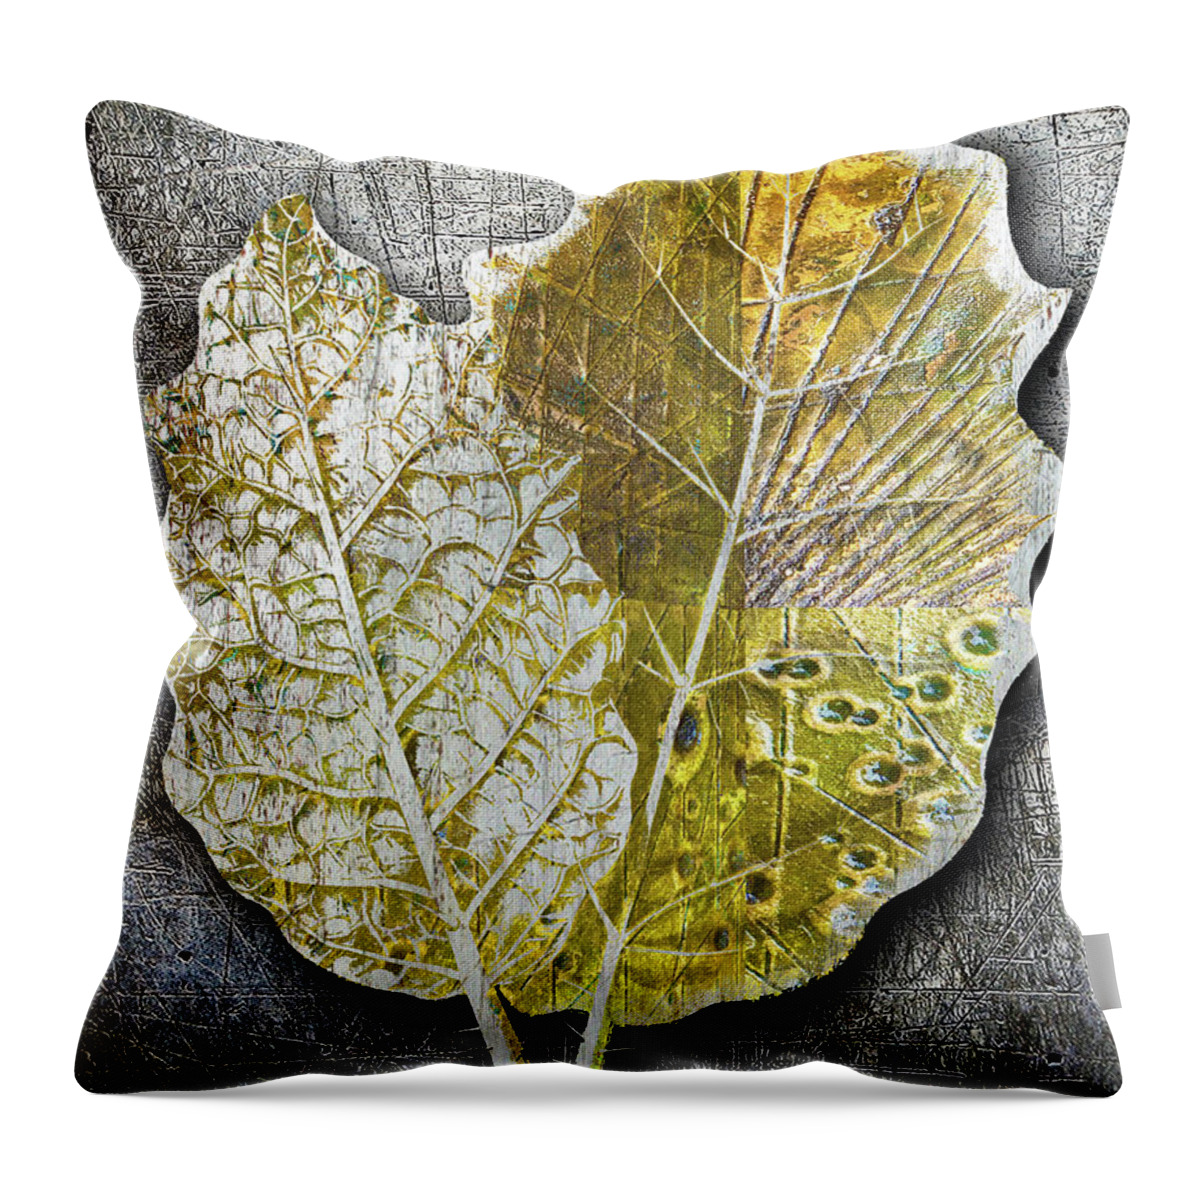 1800s Throw Pillow featuring the painting Metal Metallic Gold Silver Leaves 1 by Tony Rubino